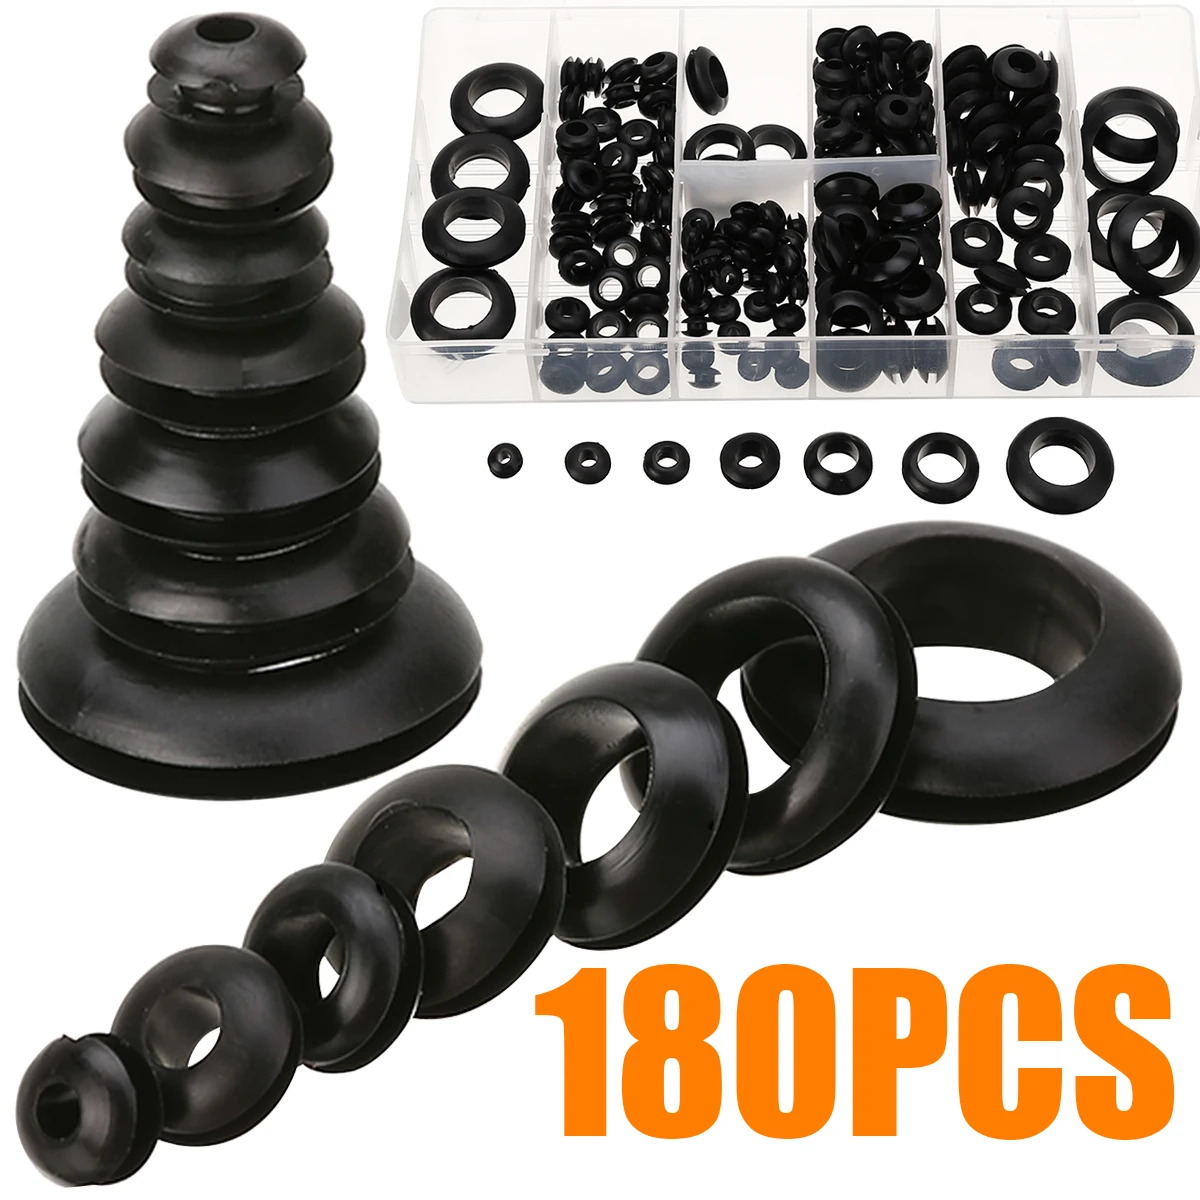 5/16 1 5/8 1/2 7/8 180 Pieces Rubber Grommet Assortment Electrical Gasket Ring Set for Wire 7/16 Plug and Cable- 1/4 3/8